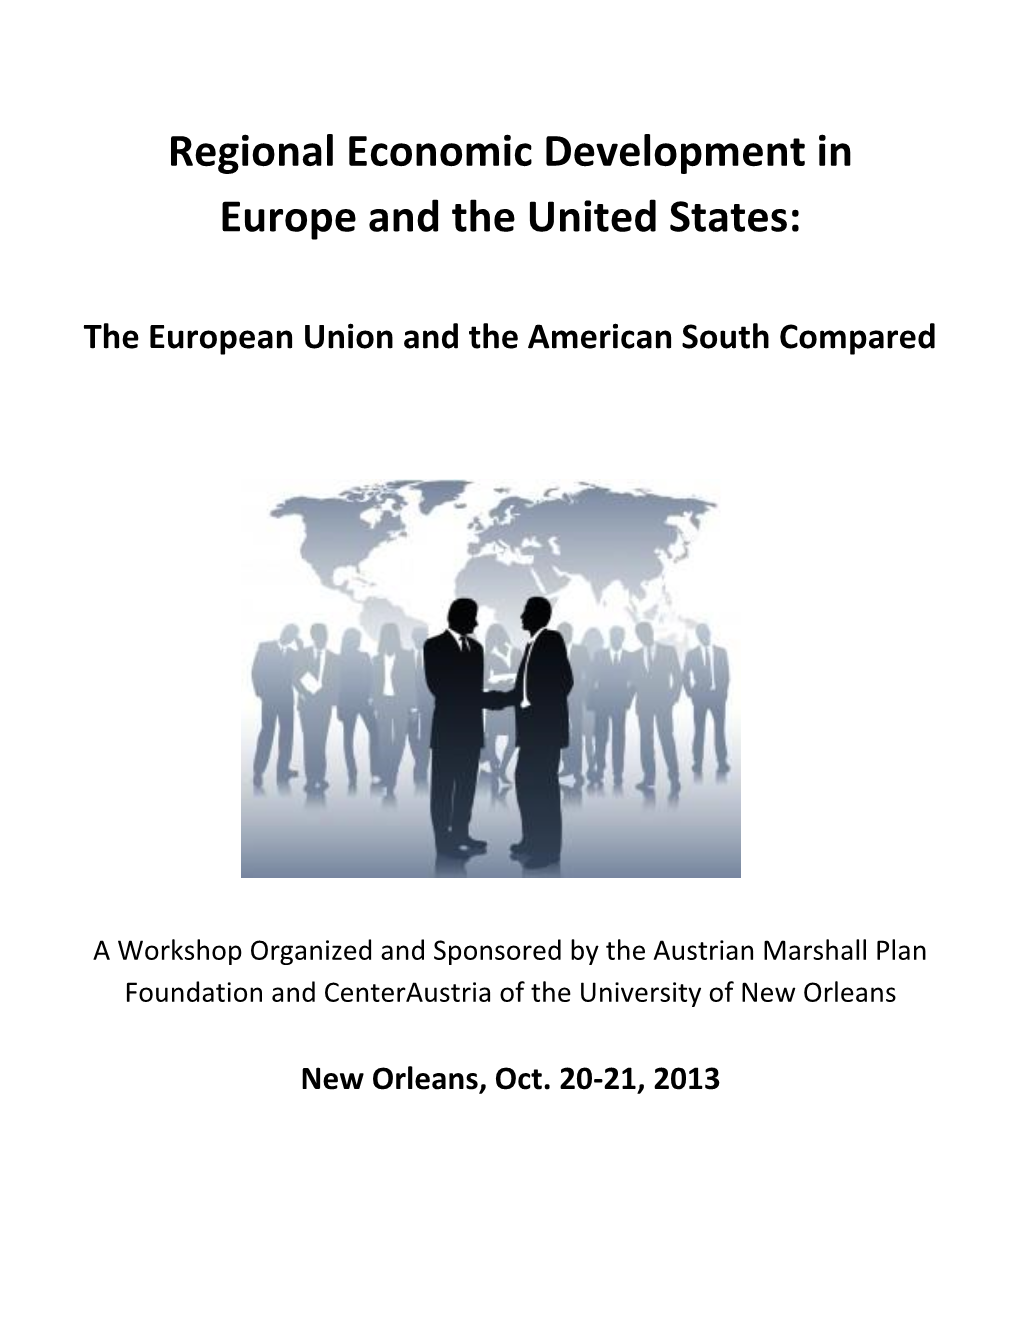 Regional Economic Development in Europe and the United States